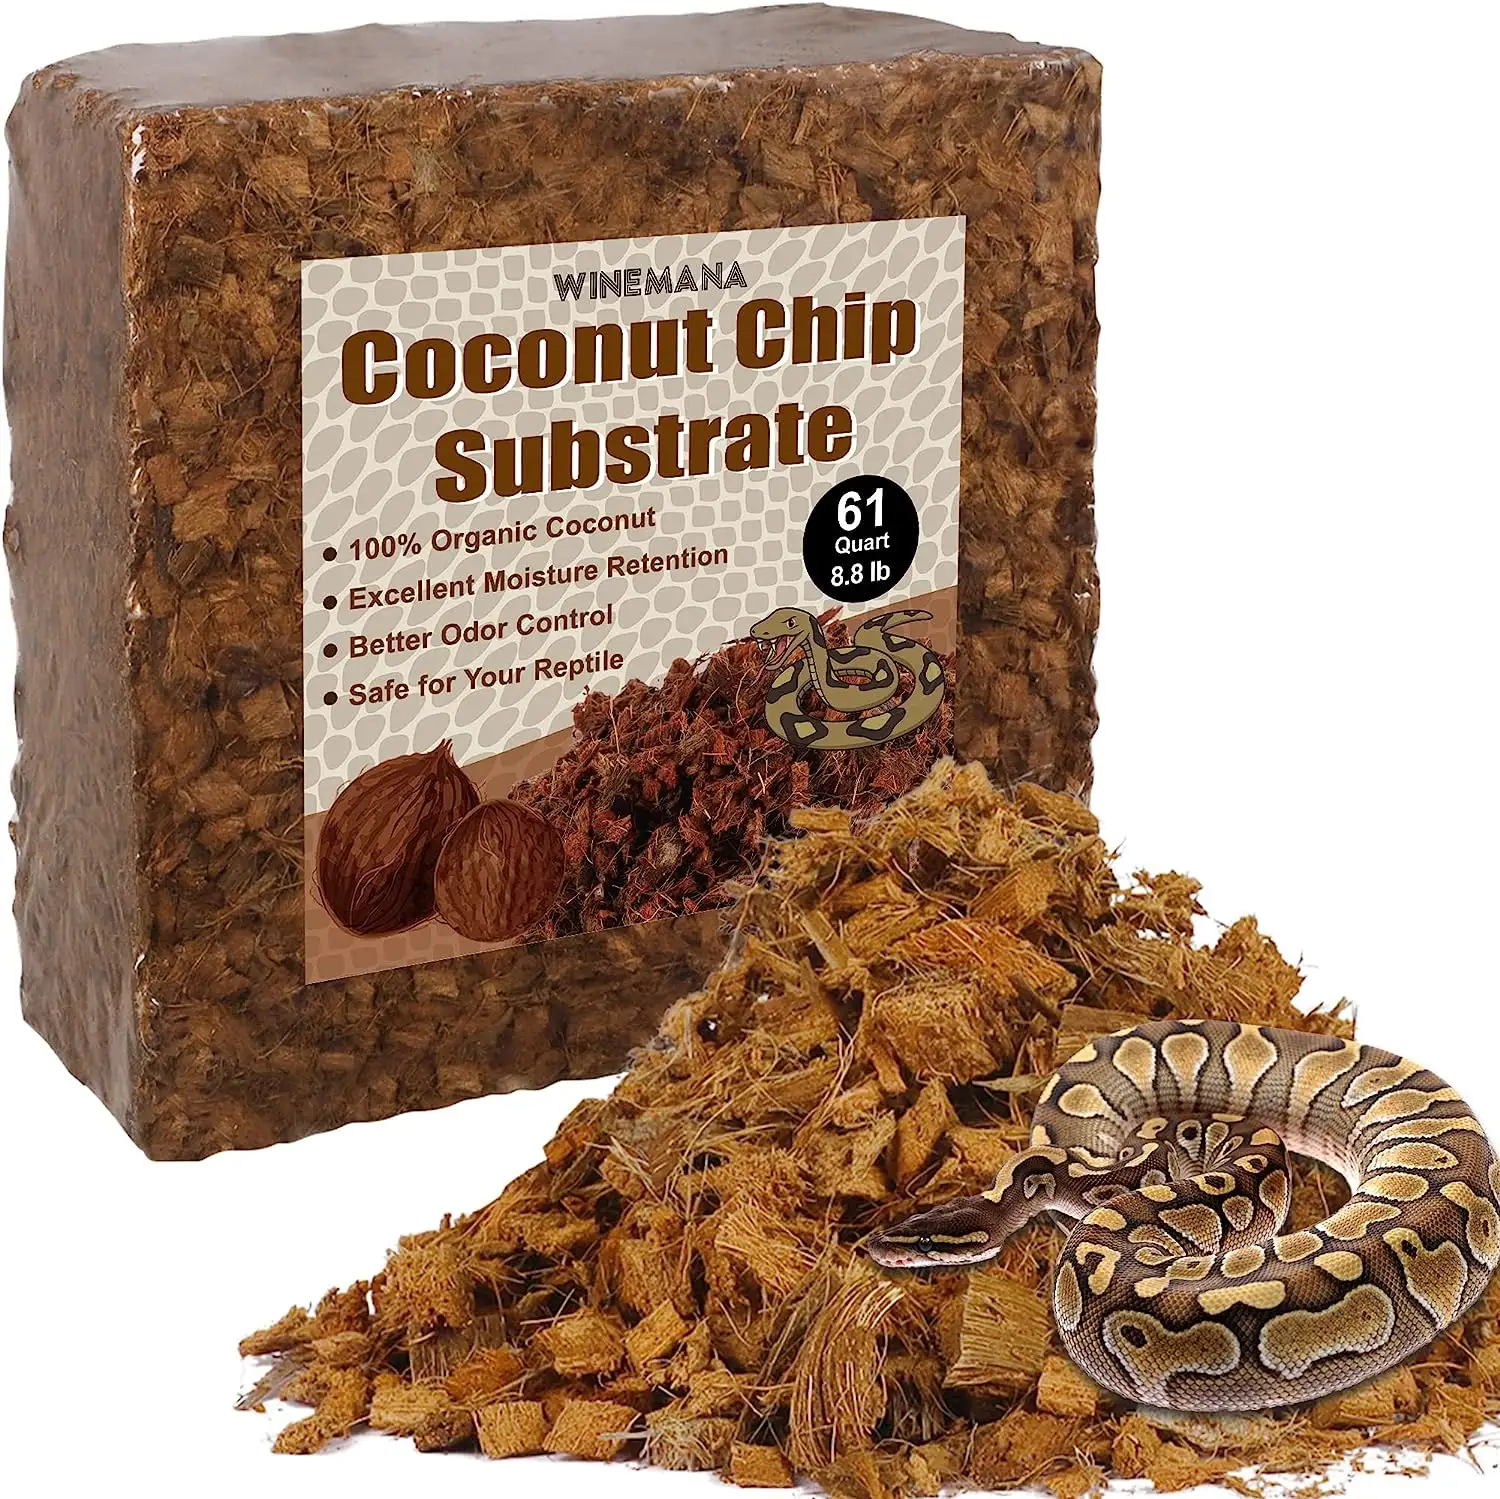 Hydroponic Coconut Cocos Coco Chip Substrate